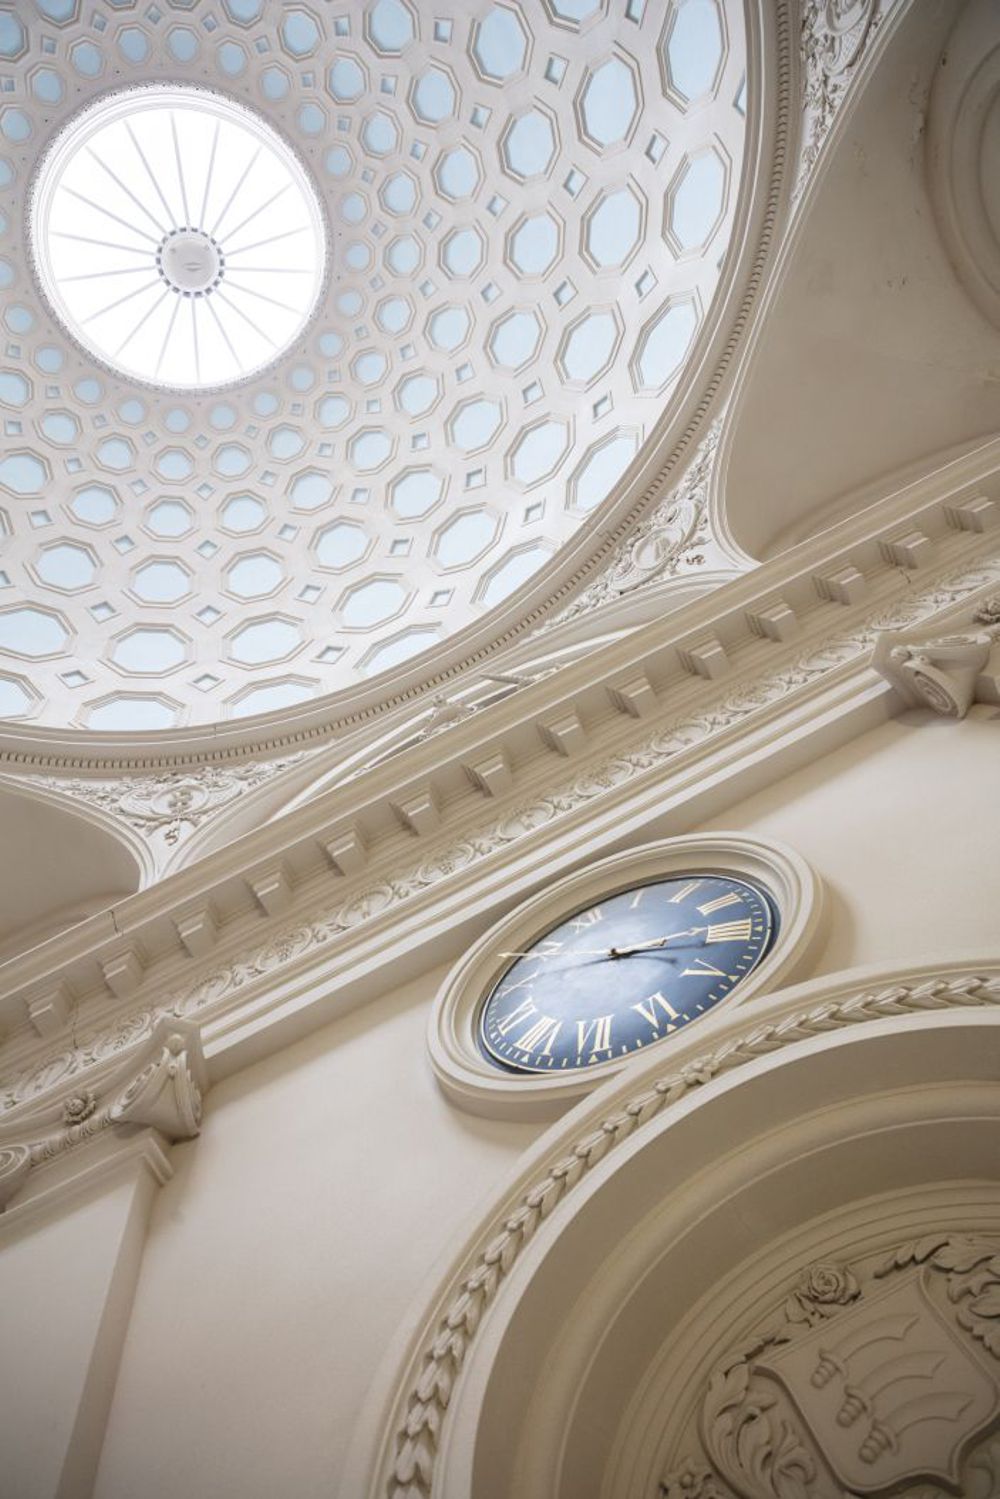 Grand former 18th century courthouse, The Old Sessions House, Clerkenwell has been transformed into one of London’s most exciting new meeting places